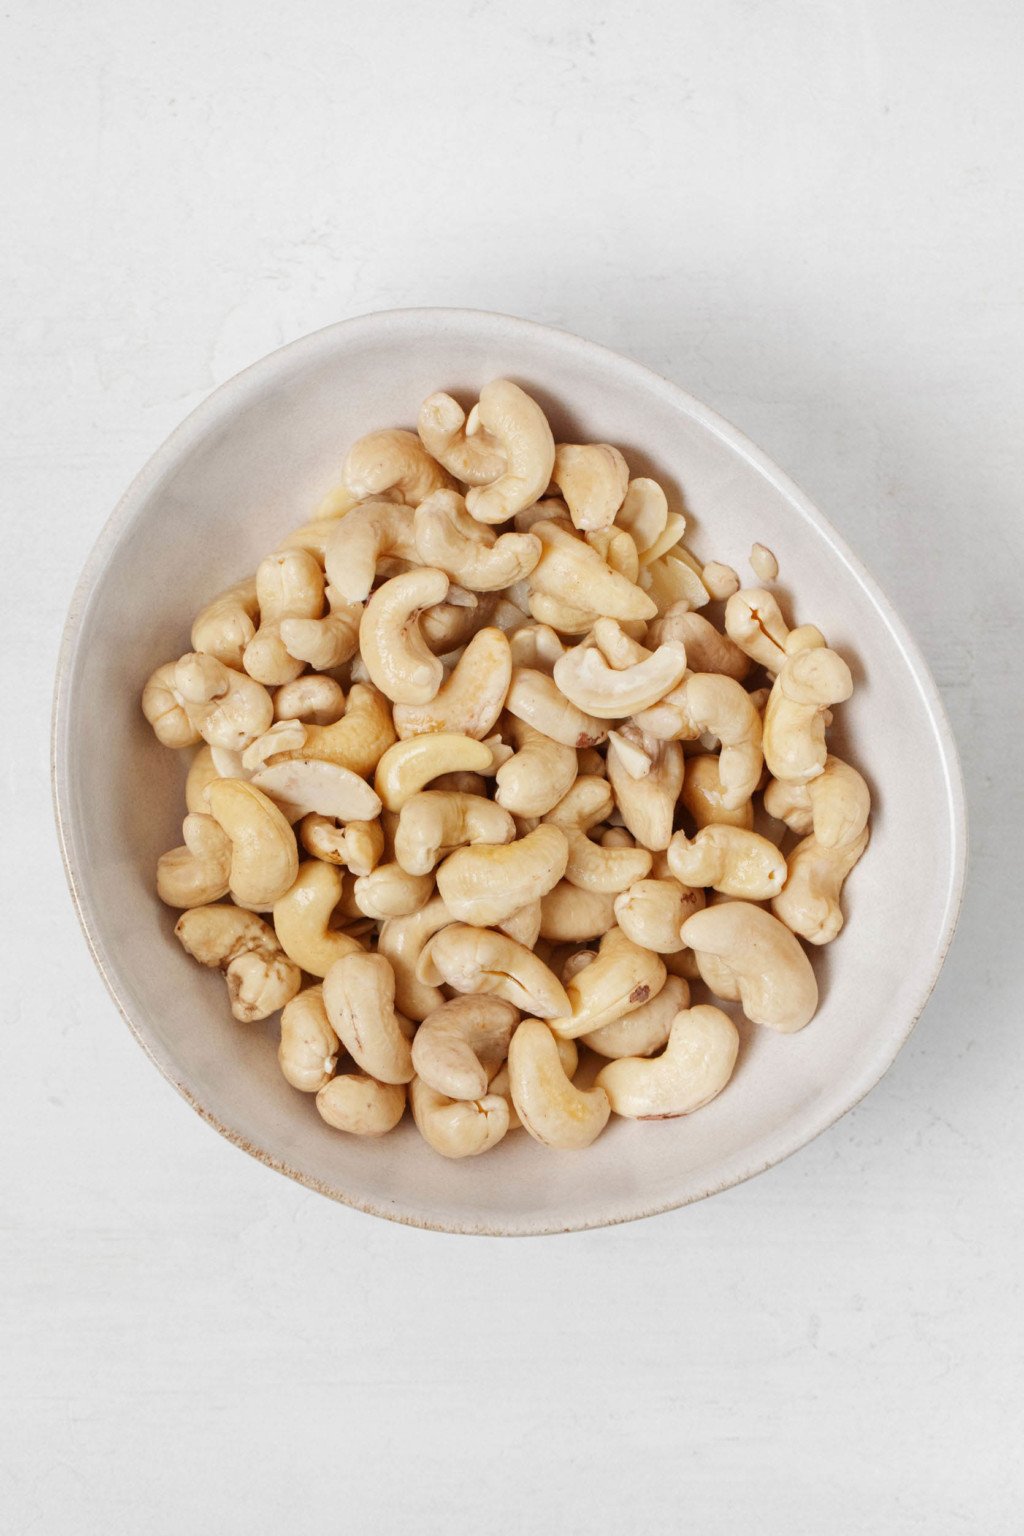 A bowl of raw cashews is resting on a white surface.